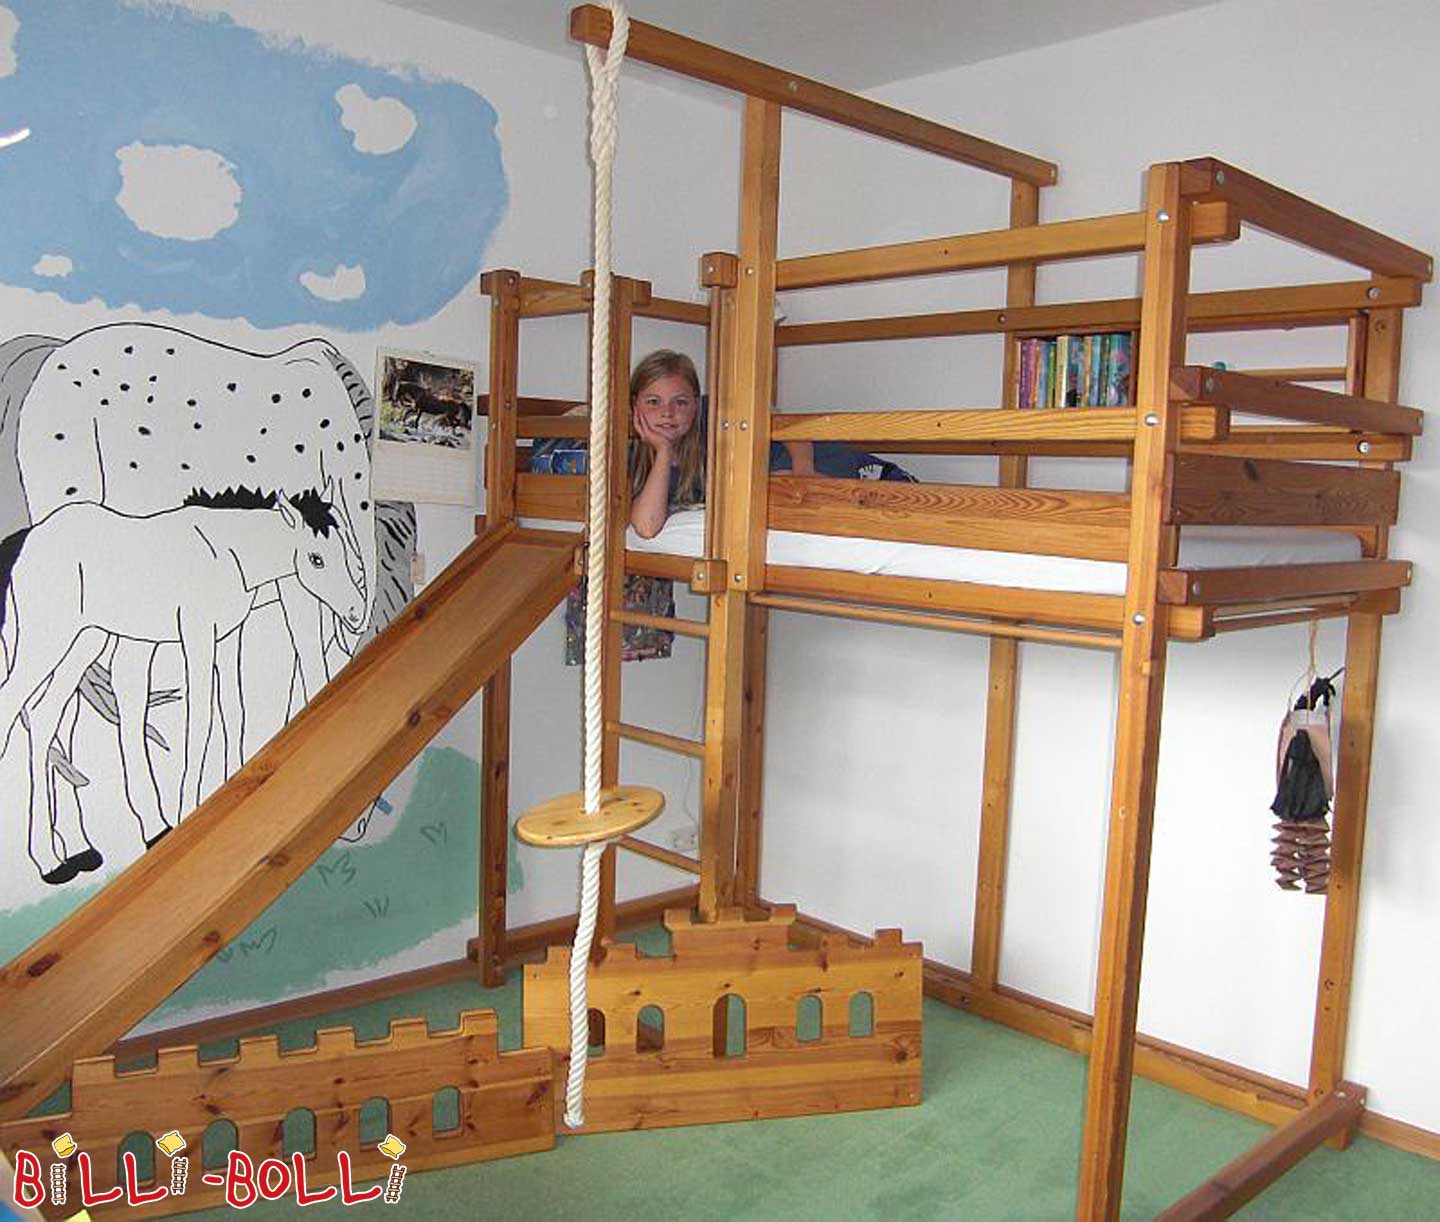 Children's loft bed growing with the child (Category: second hand loft bed)